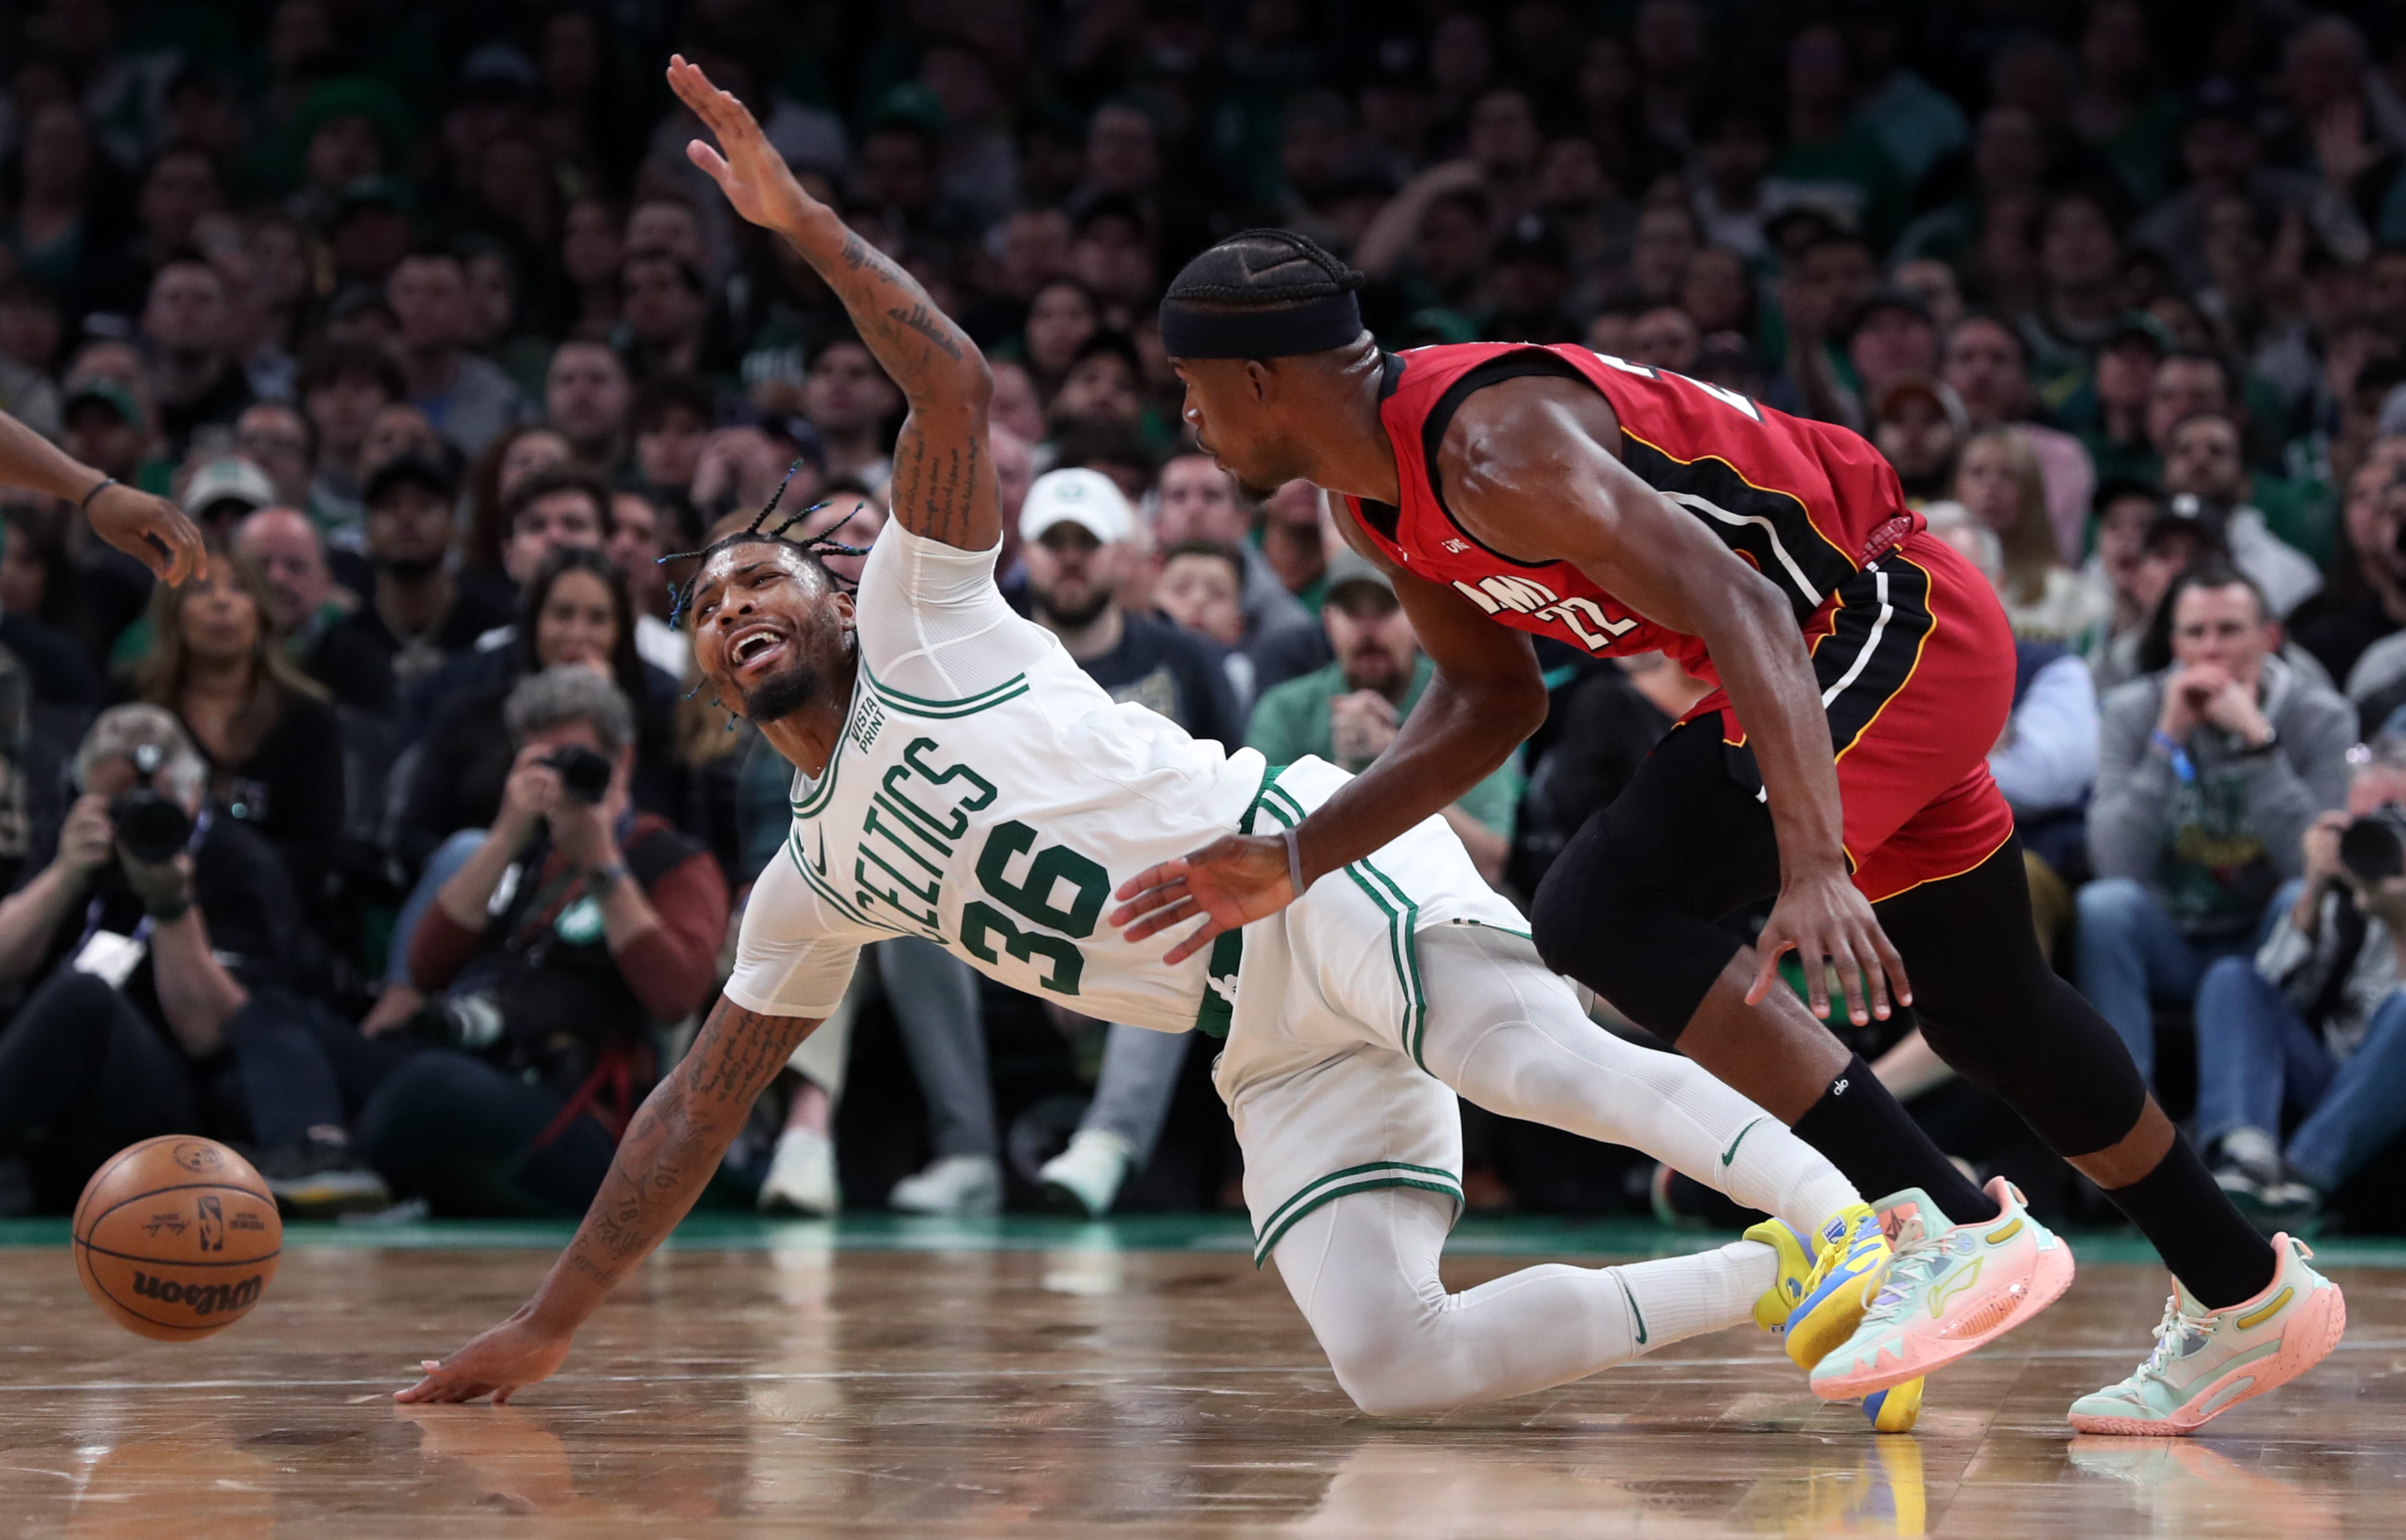 YouTube TV loses Celtics-Heat feed with 5 minutes left in game